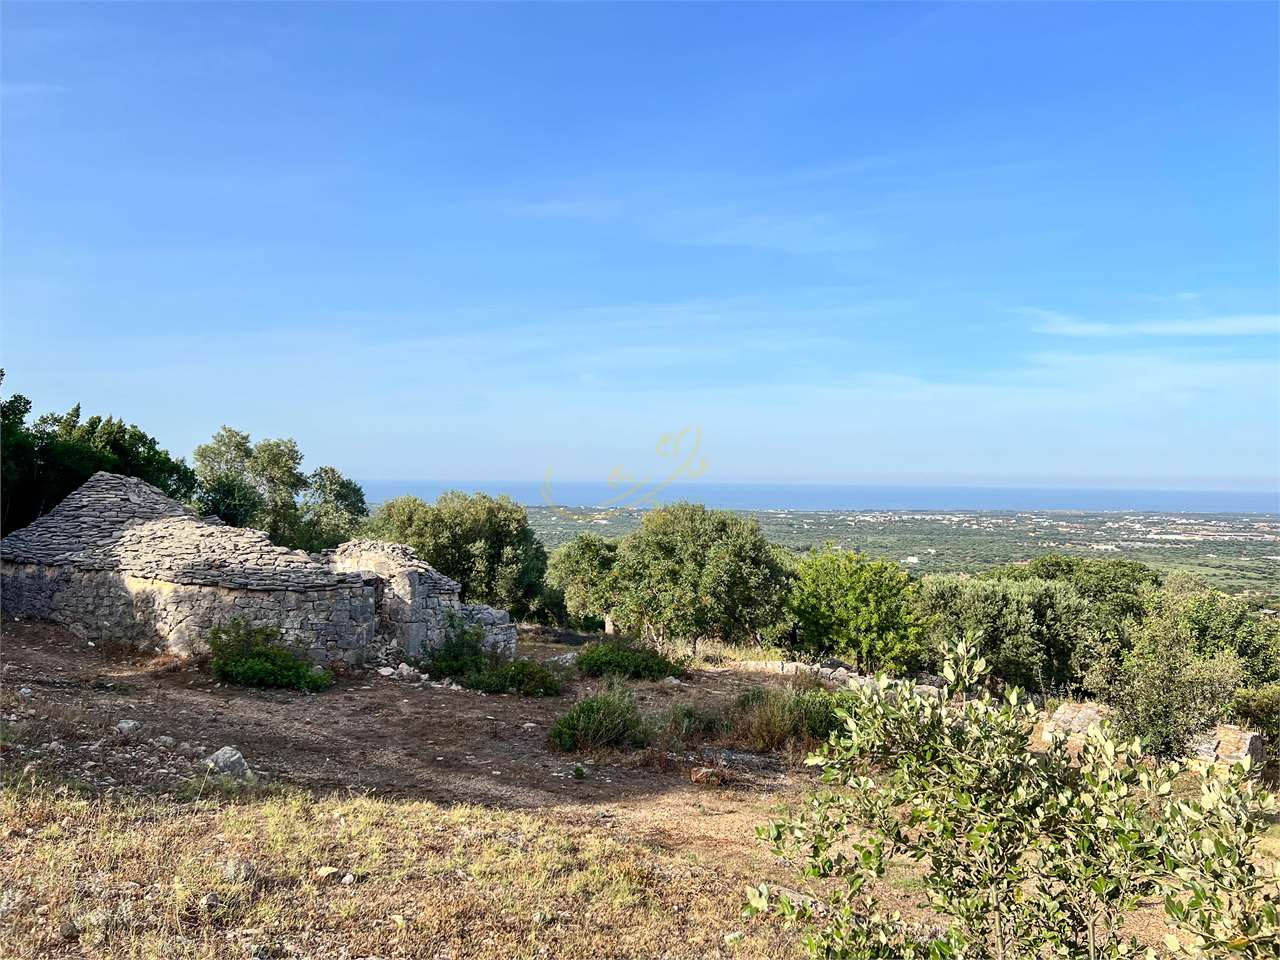 R 323 – Trulli With Sea View